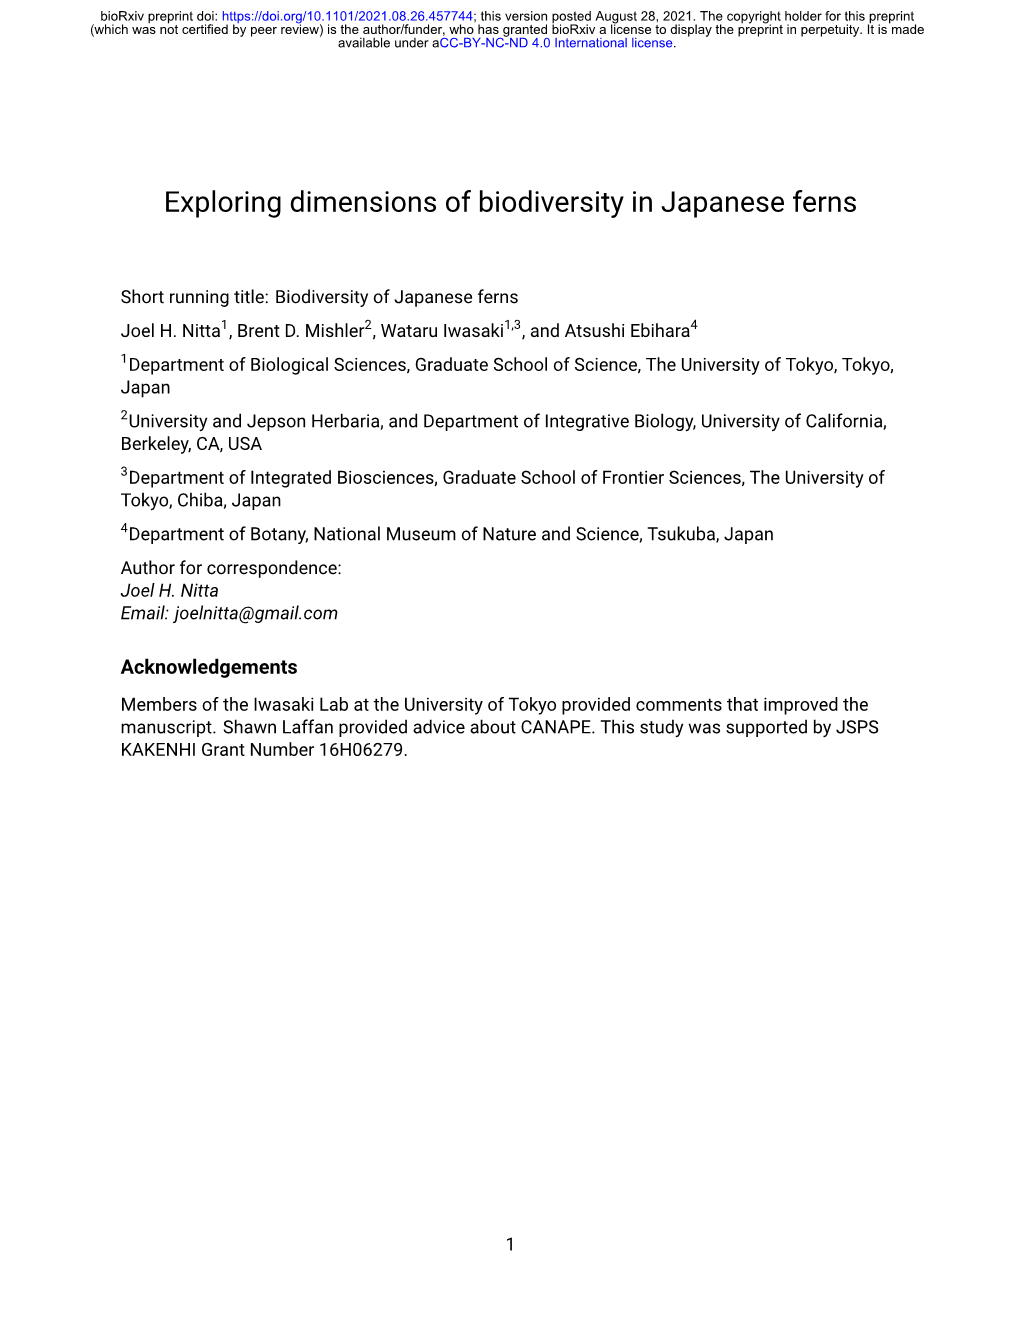 Exploring Dimensions of Biodiversity in Japanese Ferns